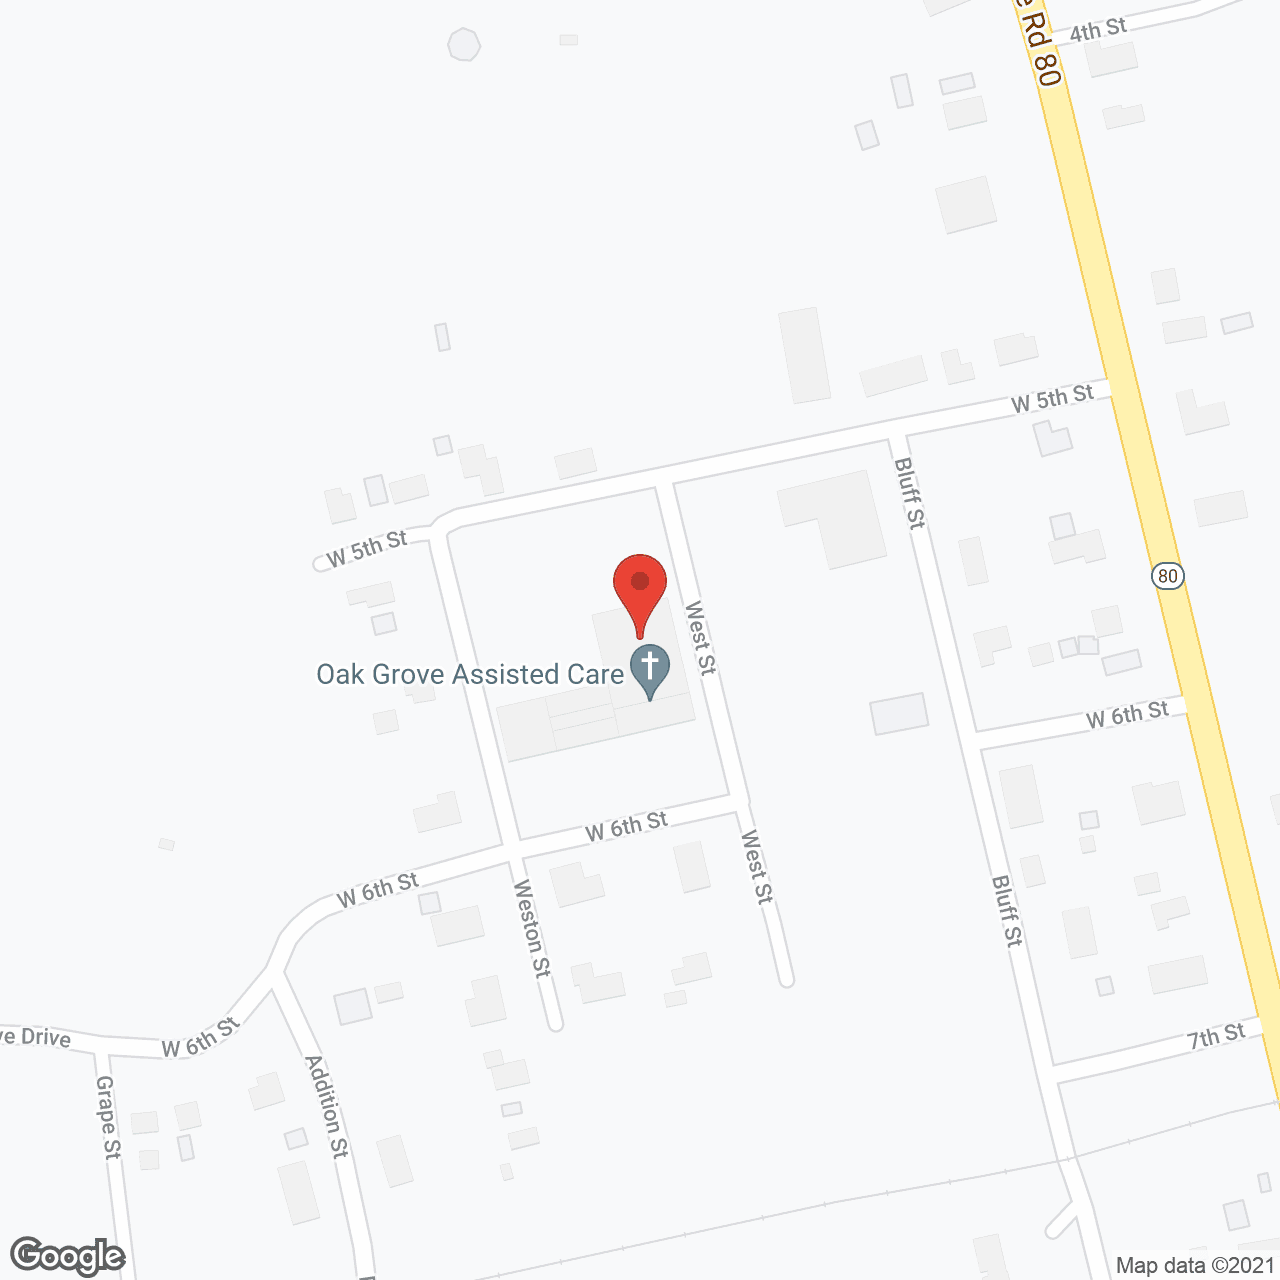 Oak Grove Assisted Care in google map